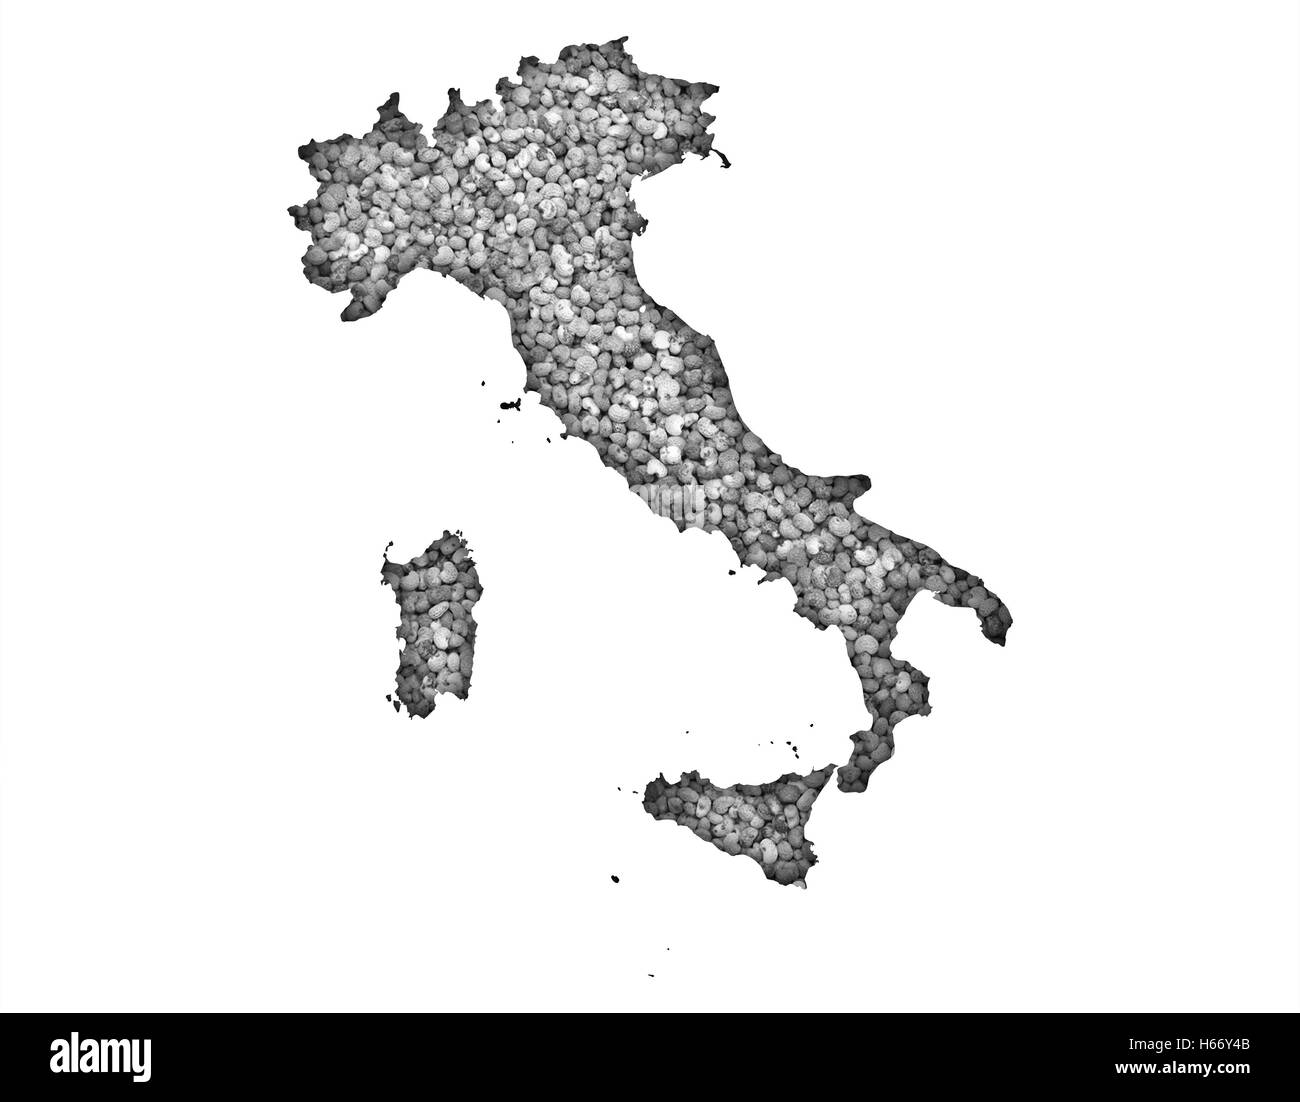 Map of Italy on poppy seeds Stock Photo